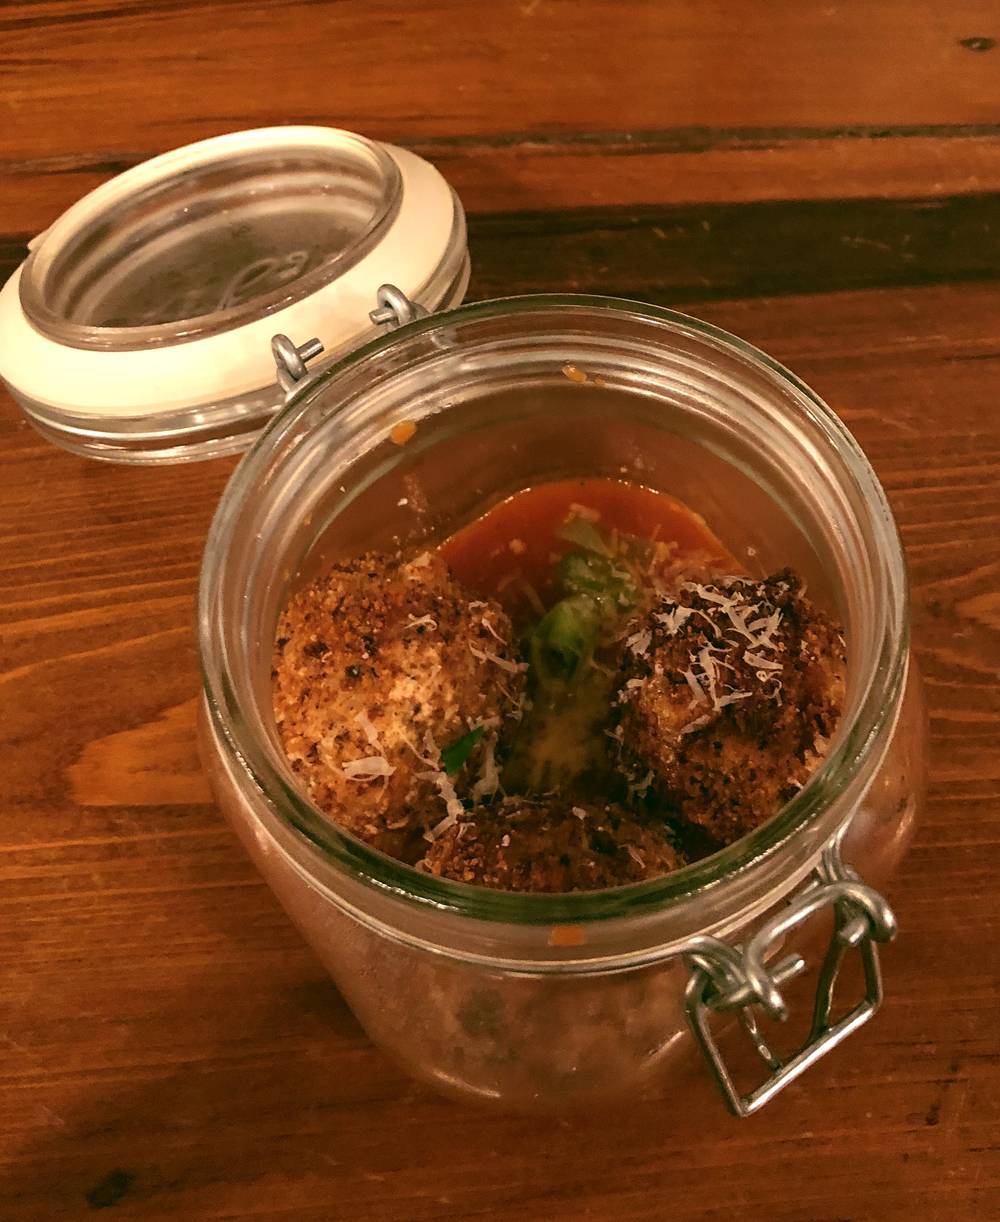 Image: Potato fritter appetizer at the WheelHouse. The hinged-lid mason jar is open. In the jar are three potato fritters in a red marinara sauce. Shaved parmesan dusts the top of the fritters. The jar sits on a wood table. Photo by Jessica Hammie.